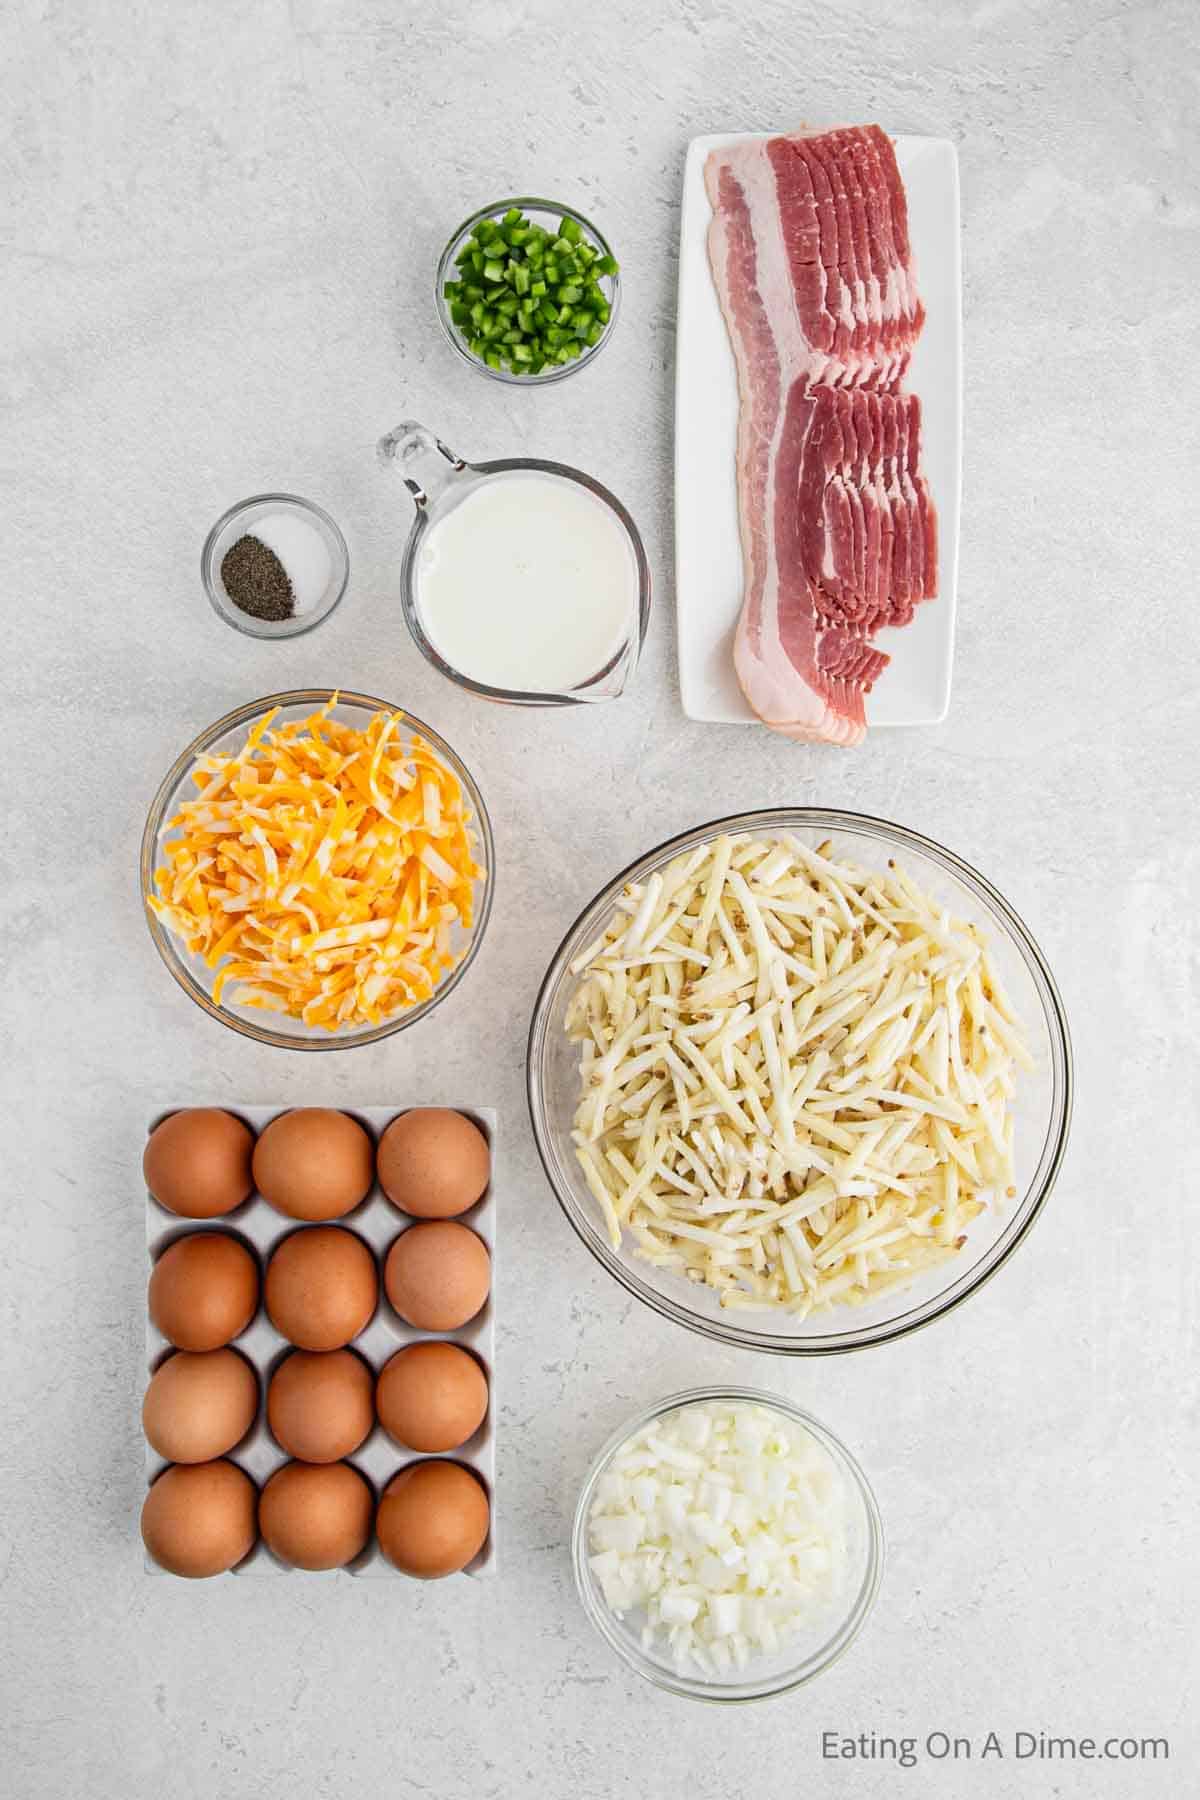 Bacon Egg Casserole Ingredients - bacon, onion, eggs, bell pepper, milk, hash brown, cheese, salt and pepper